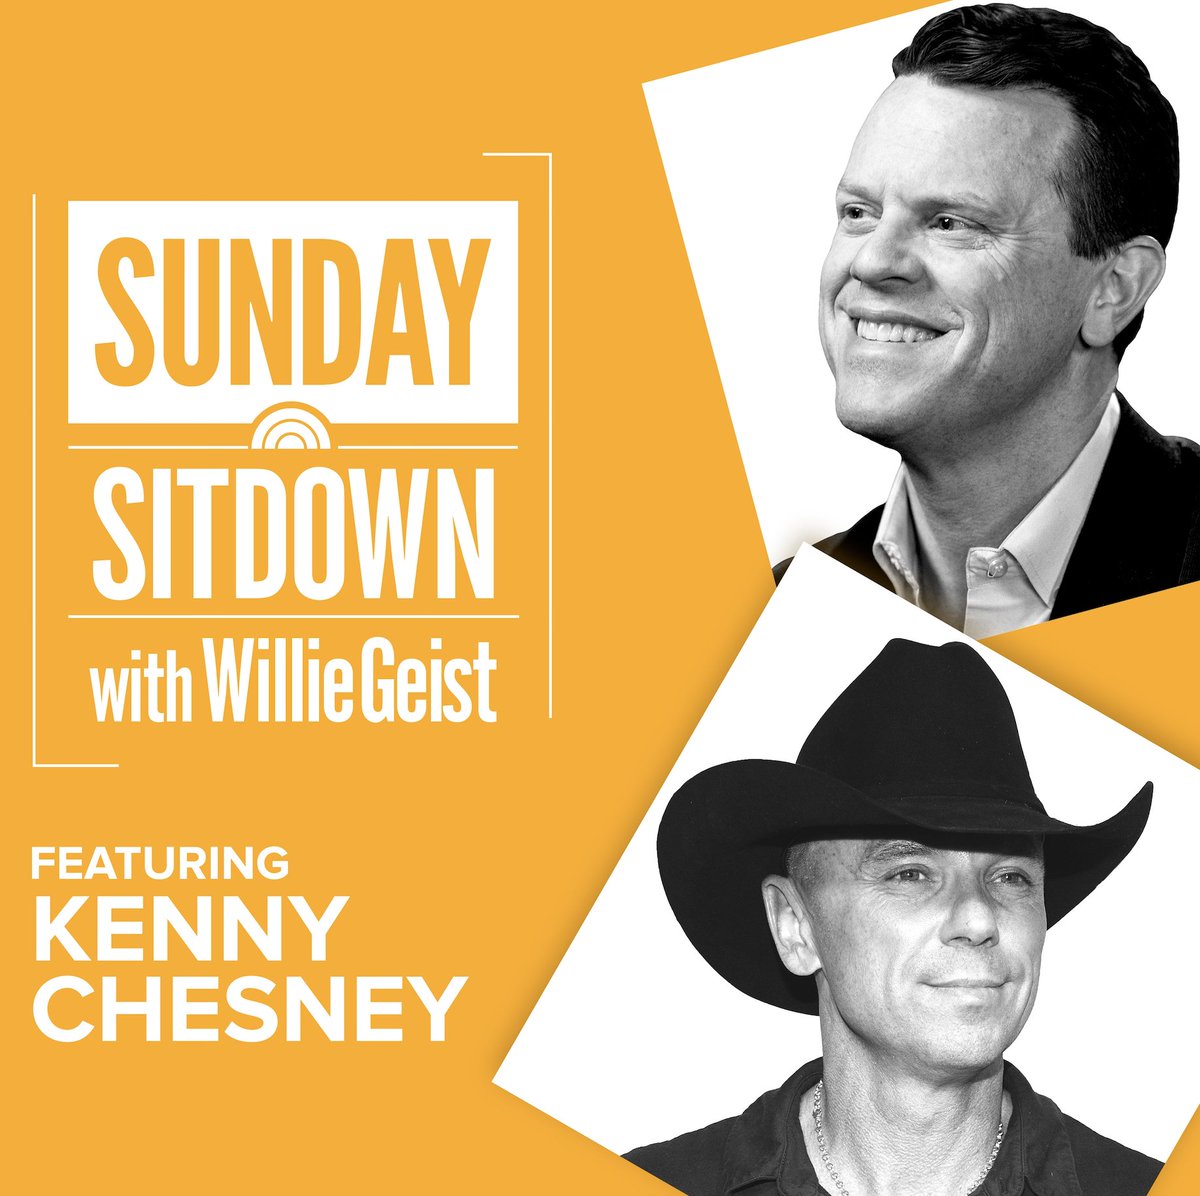 Ever wonder what it's like to have 50,000 fans sing your song back to you? @kennychesney describes that feeling to @WillieGeist on this week’s Sunday Sitdown! Tune in tomorrow on NBC (8-9 AM EST) for the full interview